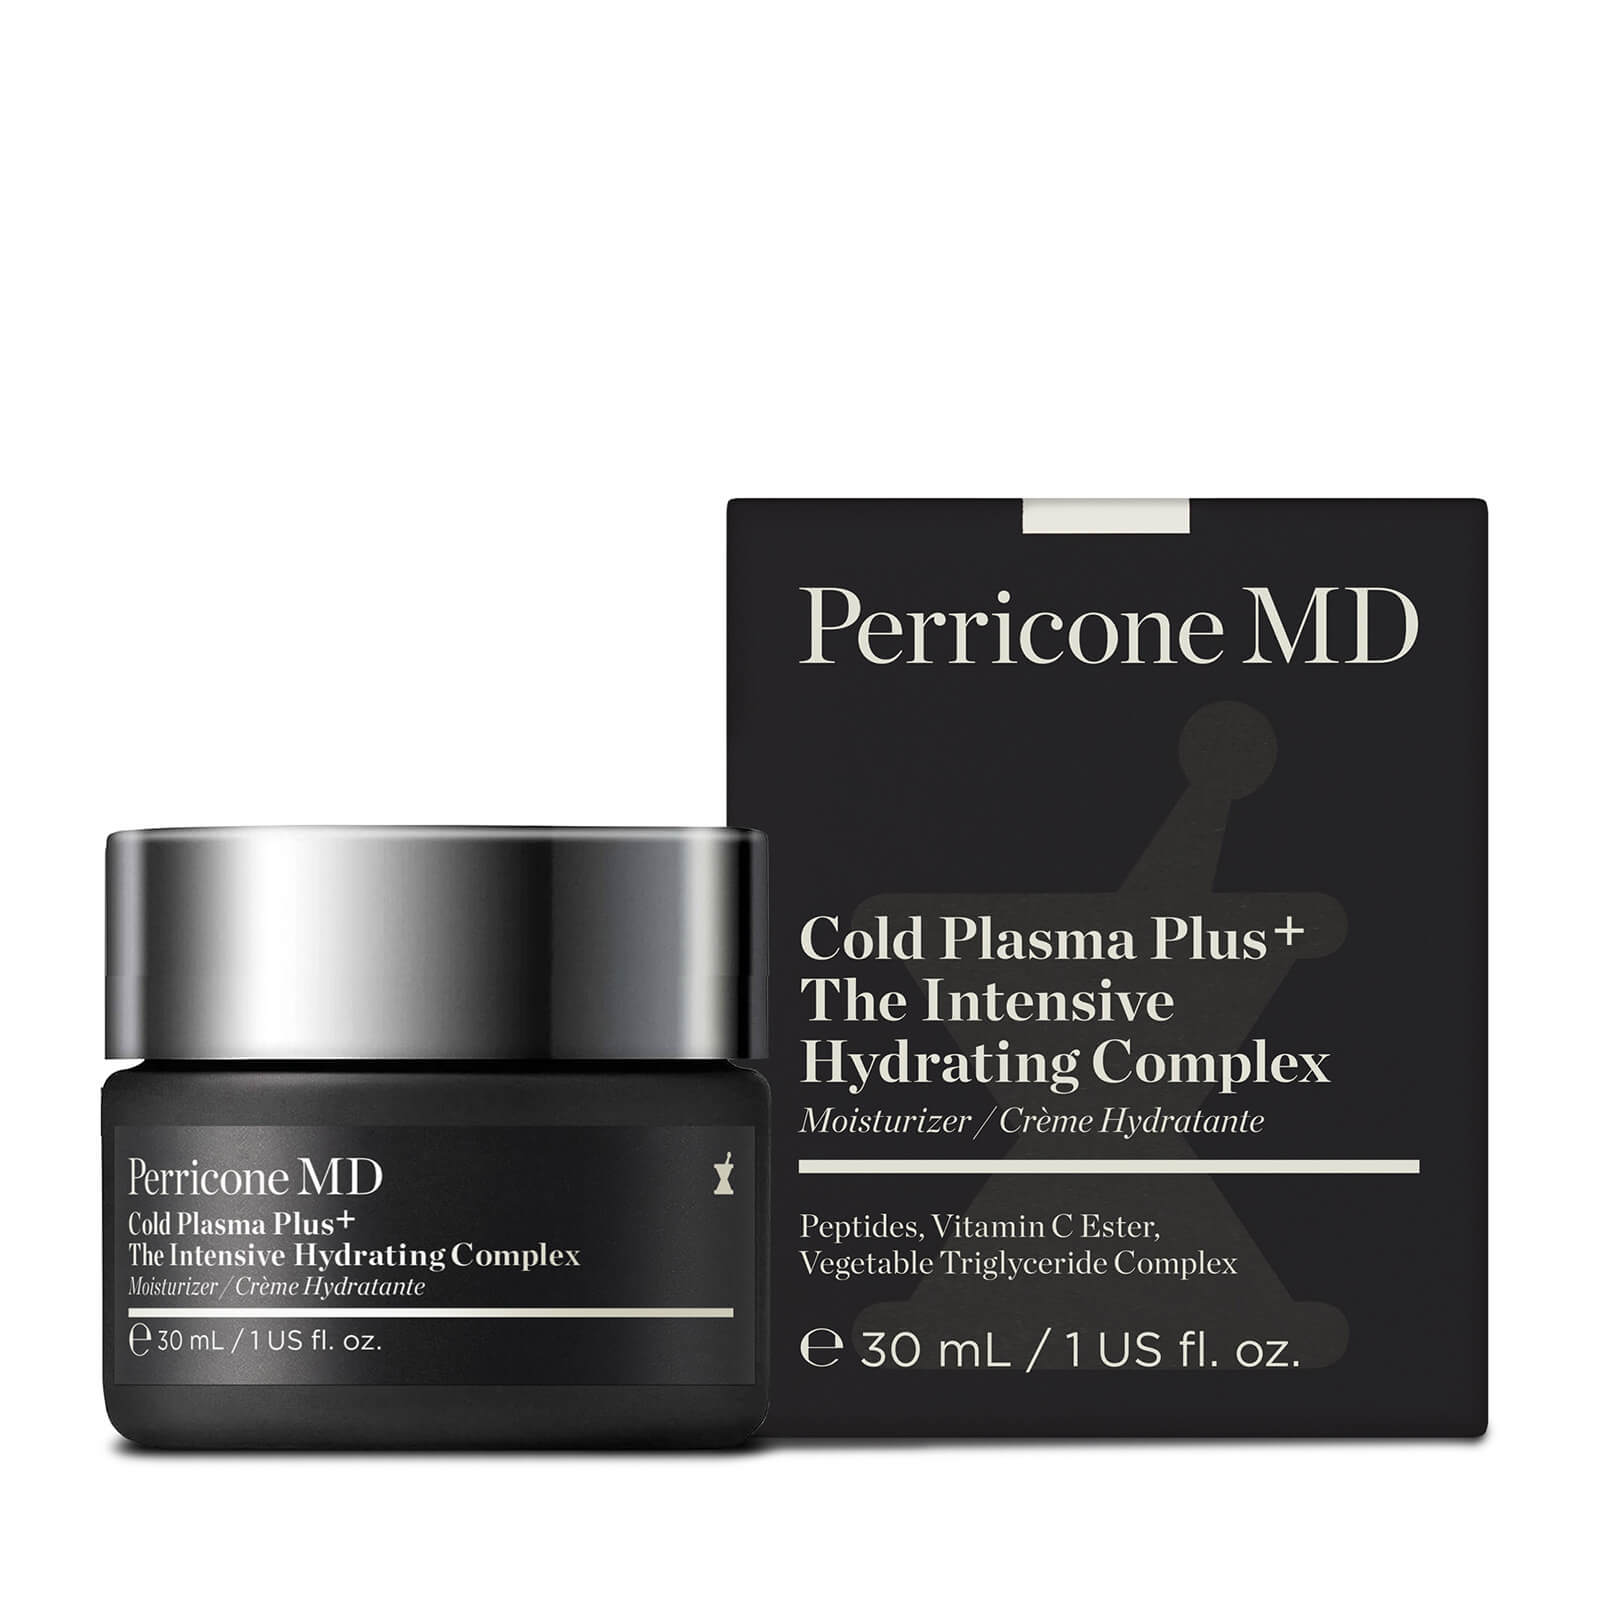 Perricone Md Cold Plasma Plus+ The Intensive Hydrating Complex